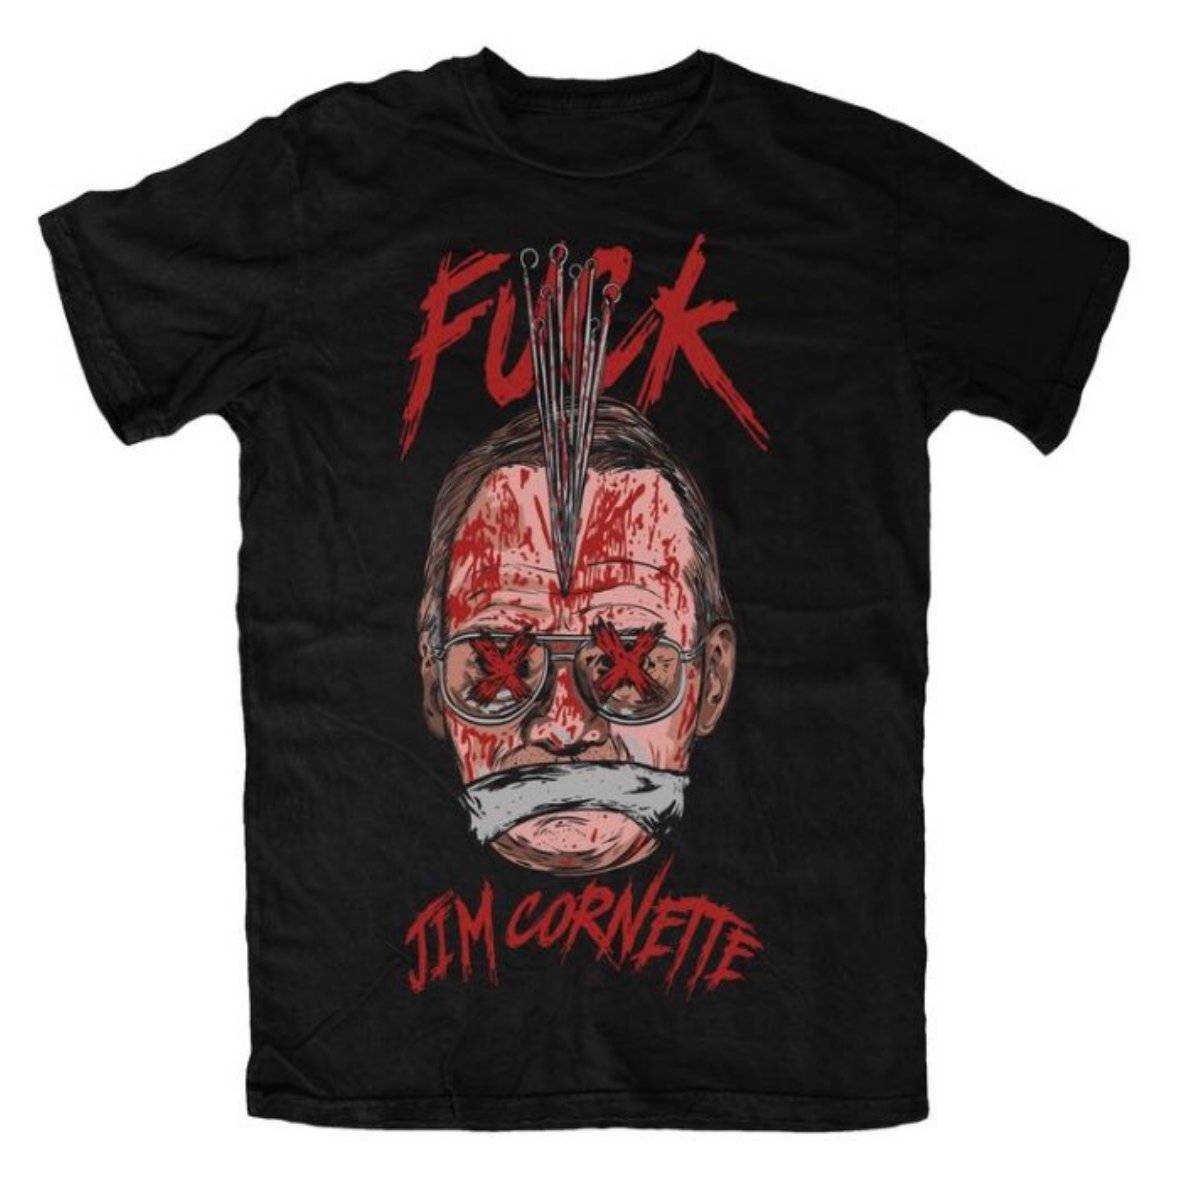 the decision in the  @TheJimCornette v.  @StaySickGRAVER trademark & right of publicity lawsuit came out last month and it is a treat. big thanks to  @ericgoldman for sending it my way. here's one of the shirts at issue (thread):  https://twitter.com/BodyslamNet/status/1171842088607989762